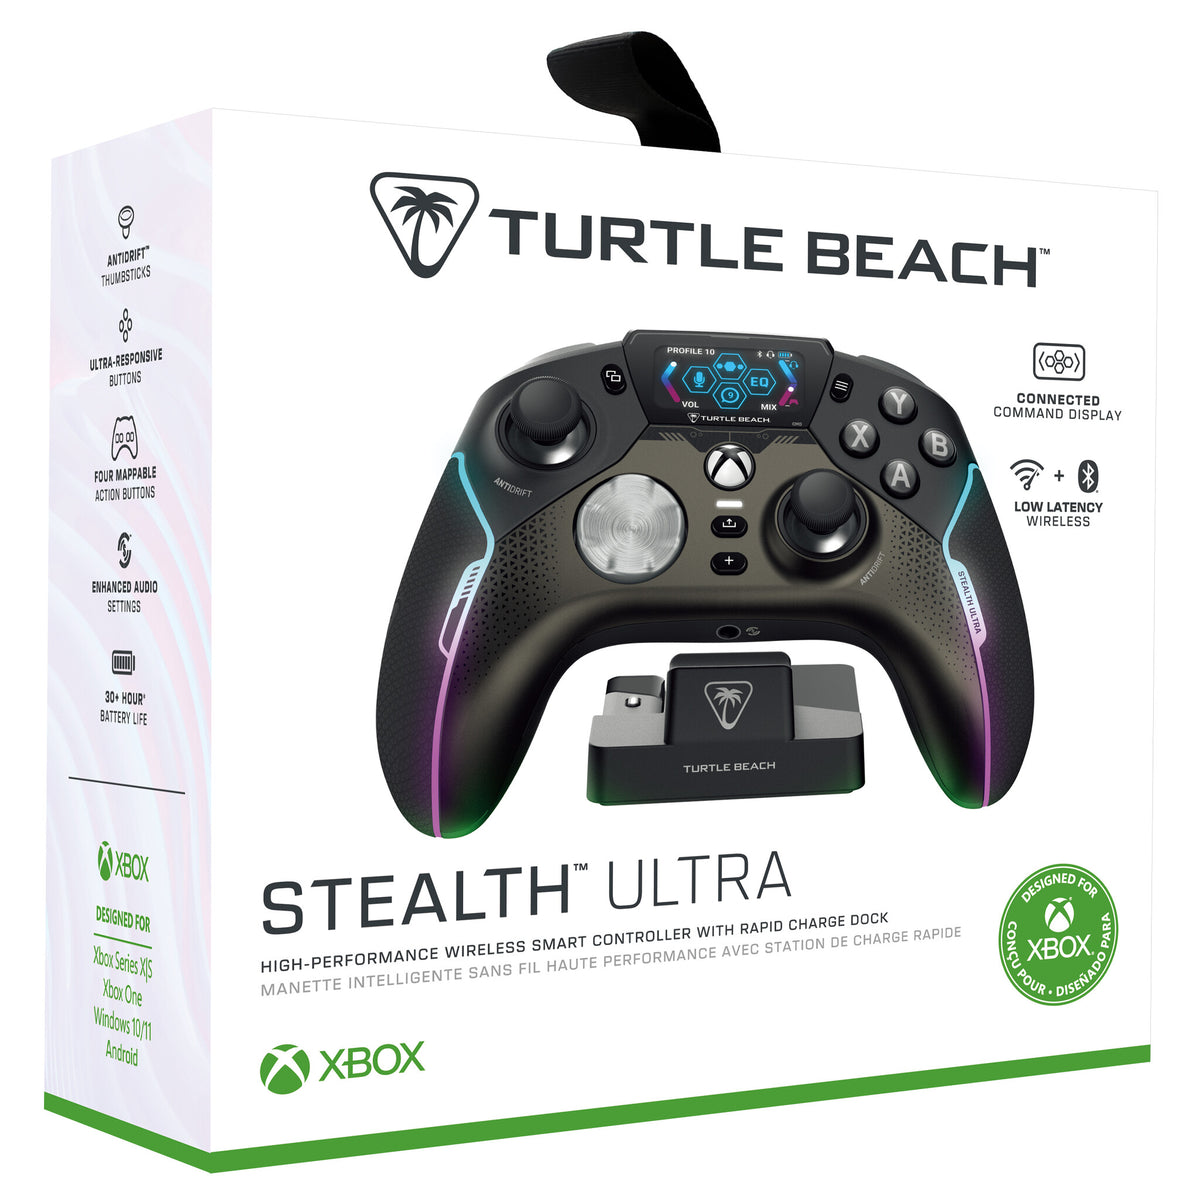 Turtle Beach Stealth Ultra - Wireless Bluetooth Controller with Rapid Charge Dock for Android / PC / Xbox Series X|S